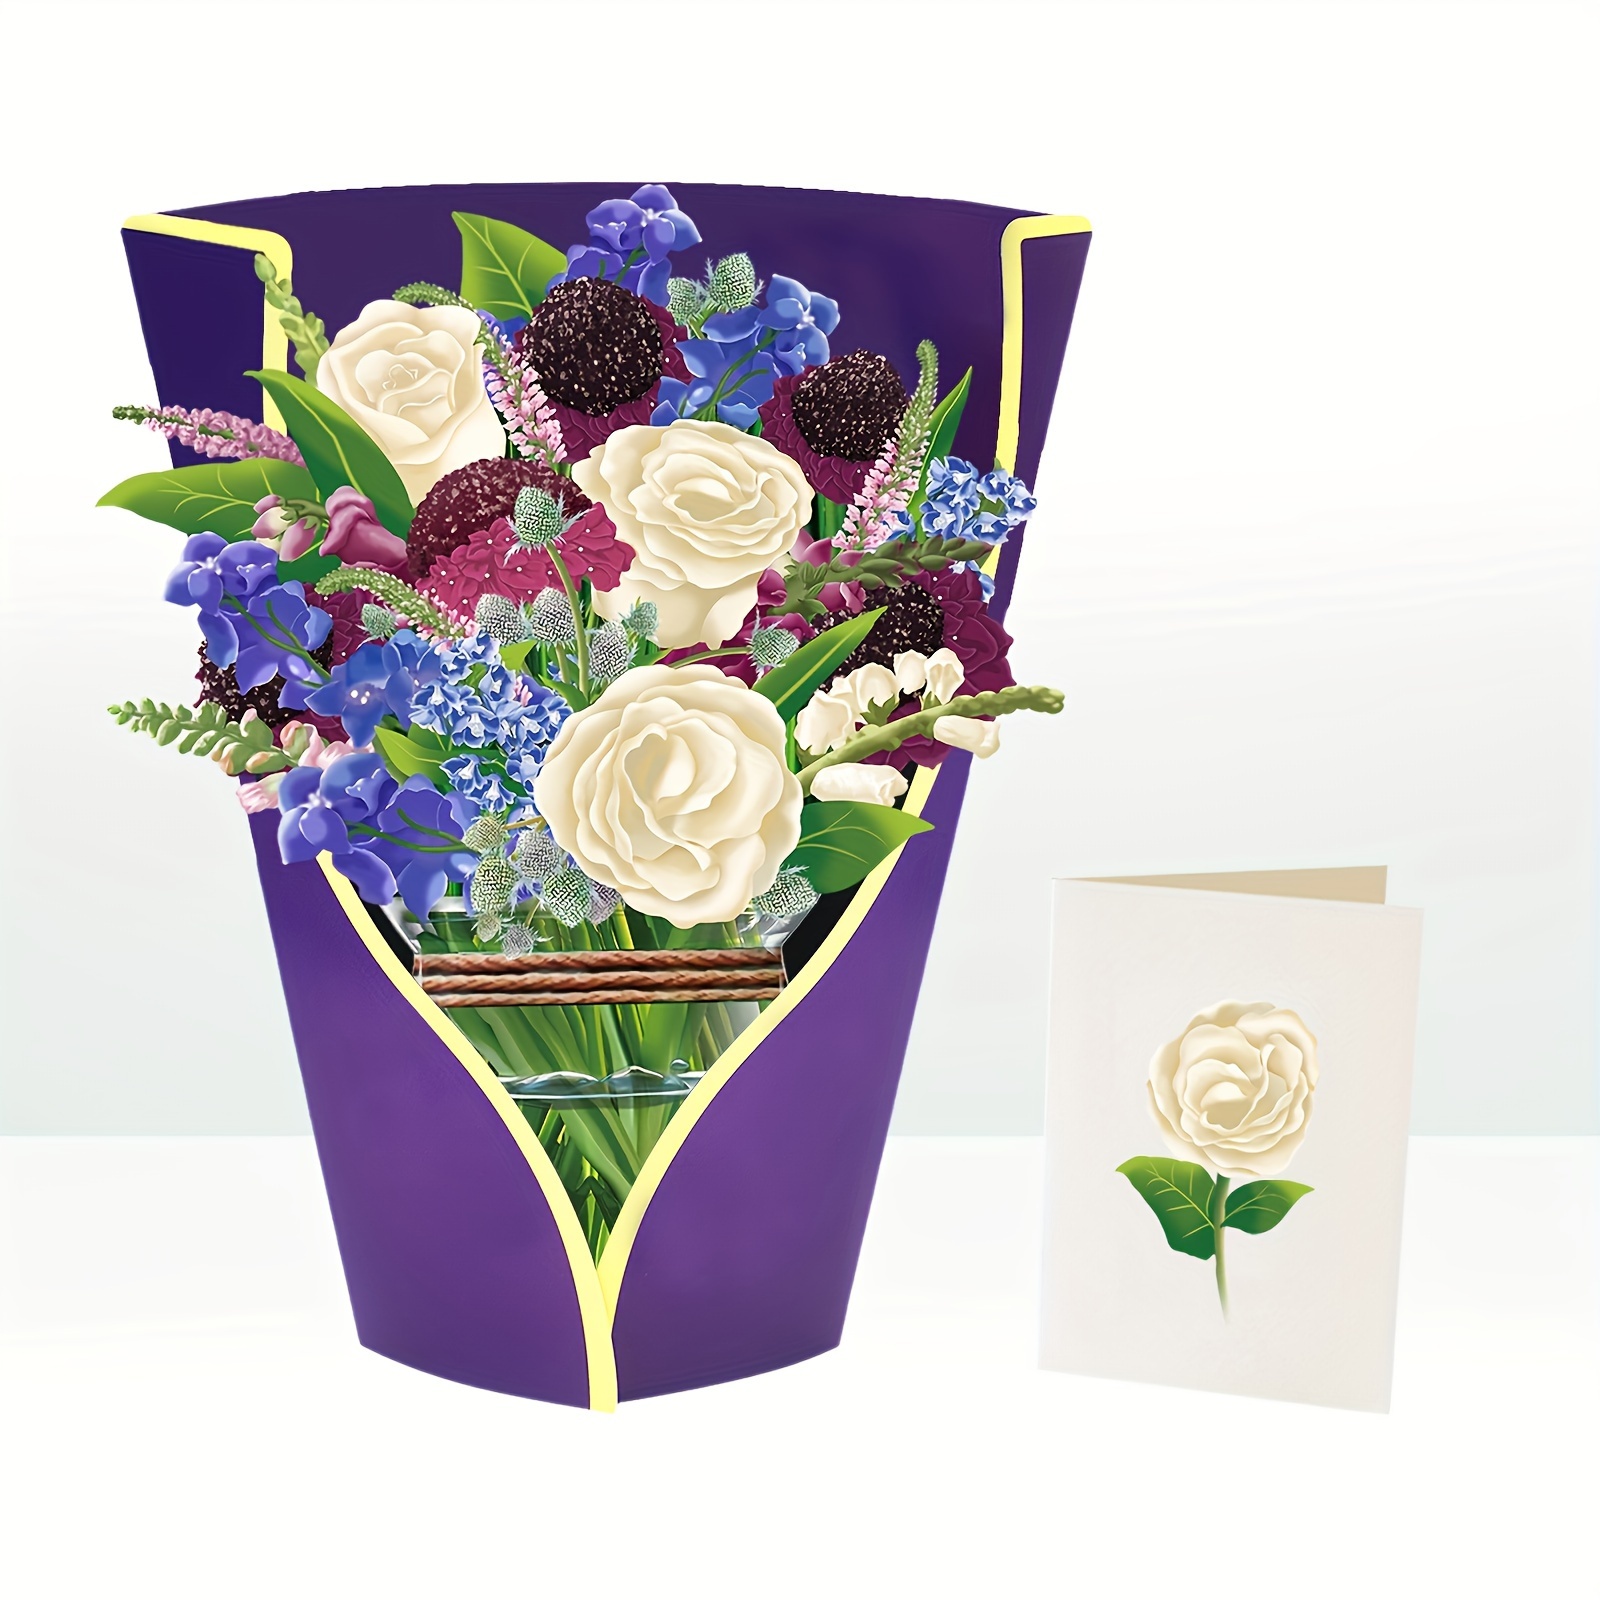 

3d Pop-up Paper Bouquet Greeting Card 12" - Versatile For Birthdays, Valentine's Day & More - Includes Note Card & Envelope